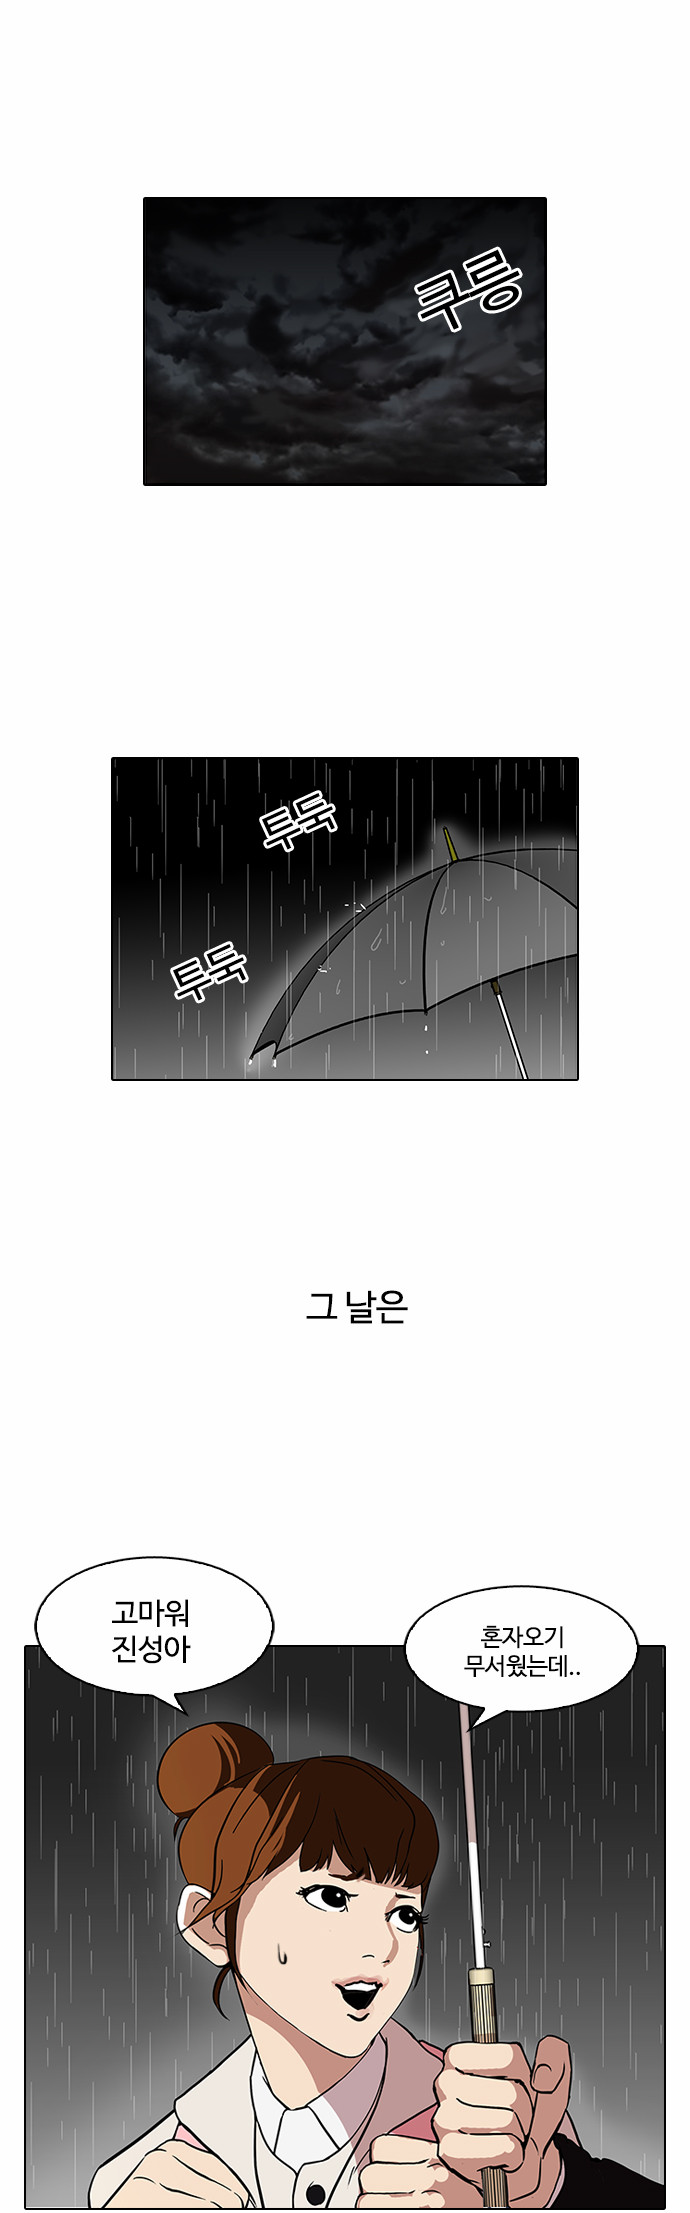 Lookism - Chapter 95 - Page 1